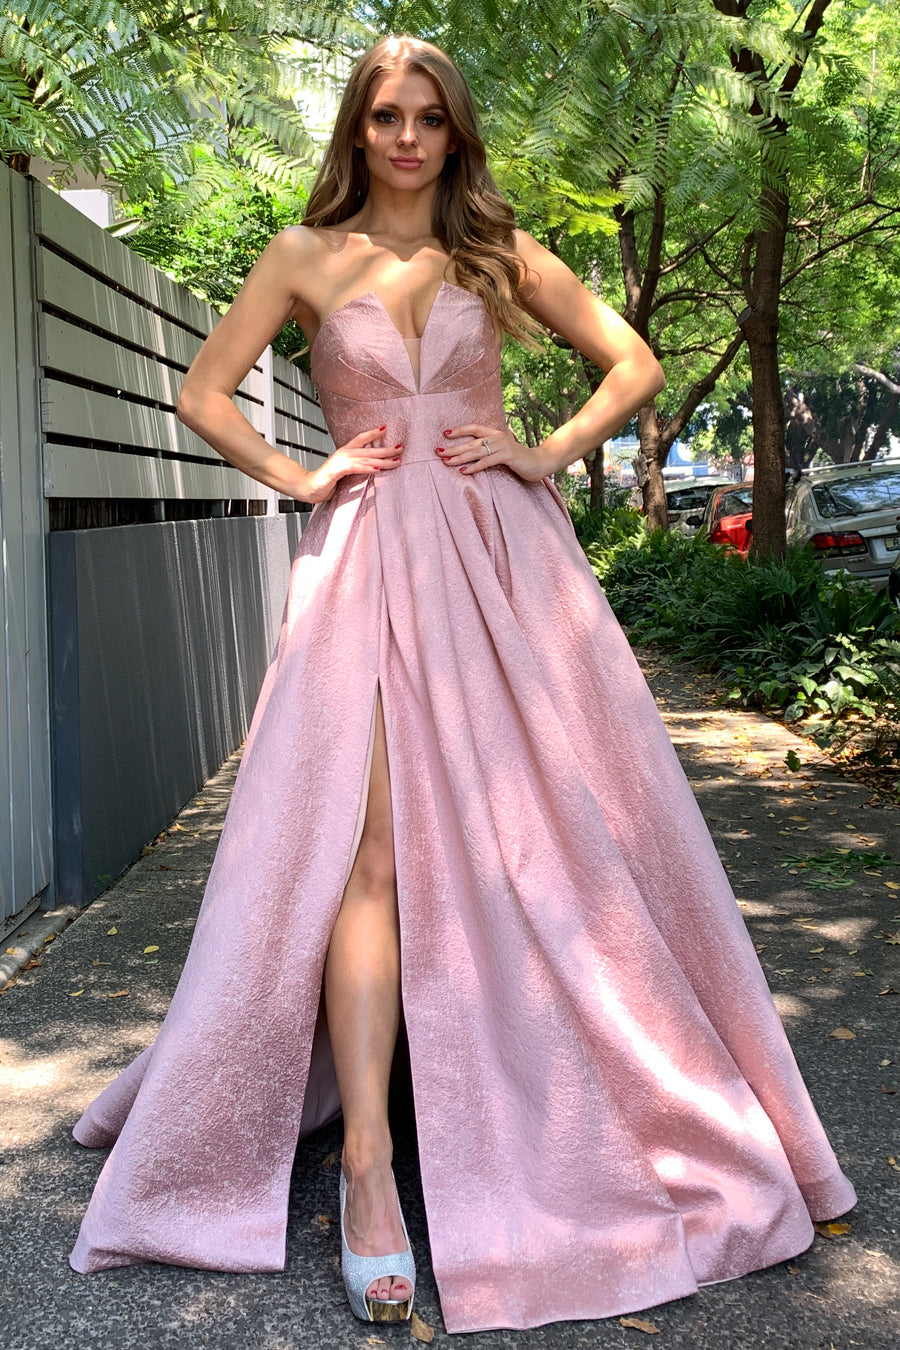 Tinaholy Couture TA611B Dusty Pink Strapless Ball Gown Formal Dress {vendor} AfterPay Humm ZipPay LayBuy Sezzle